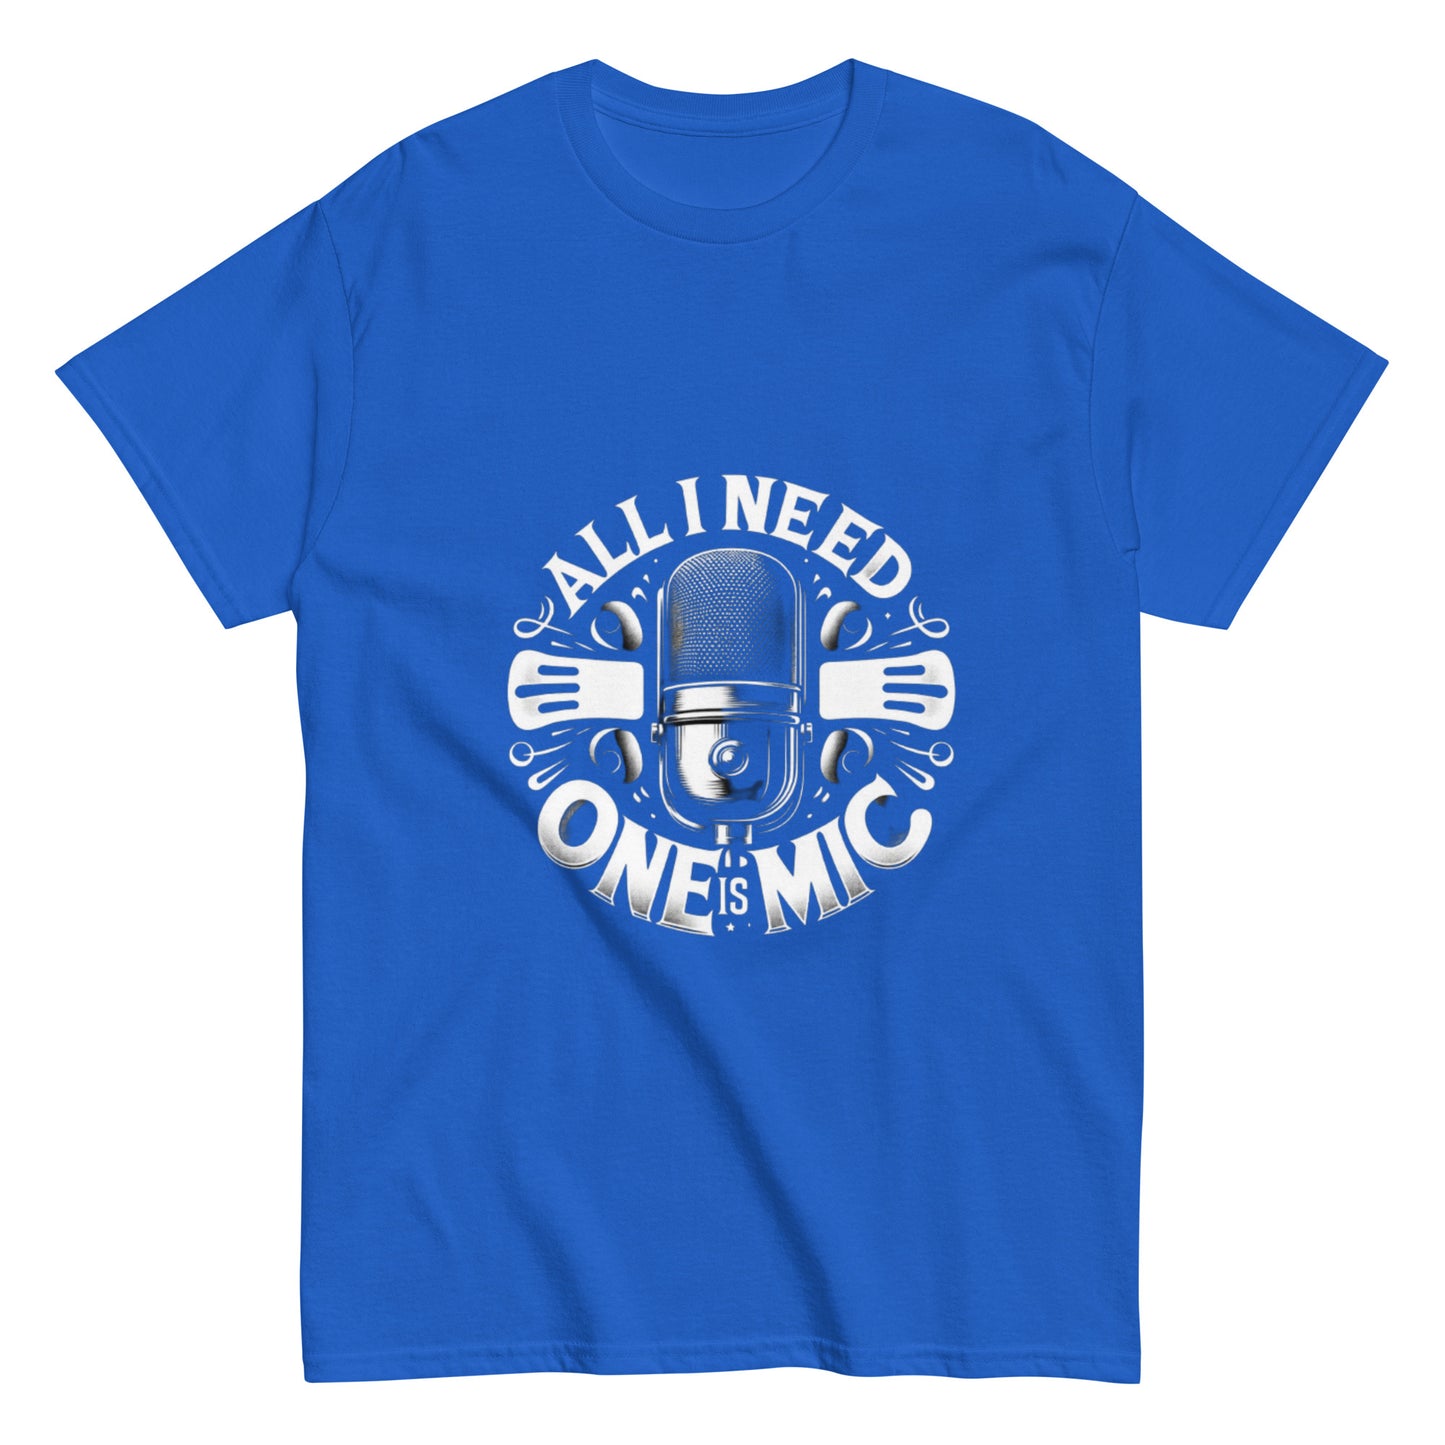 All I Need Is One Mic Unisex T-Shirt